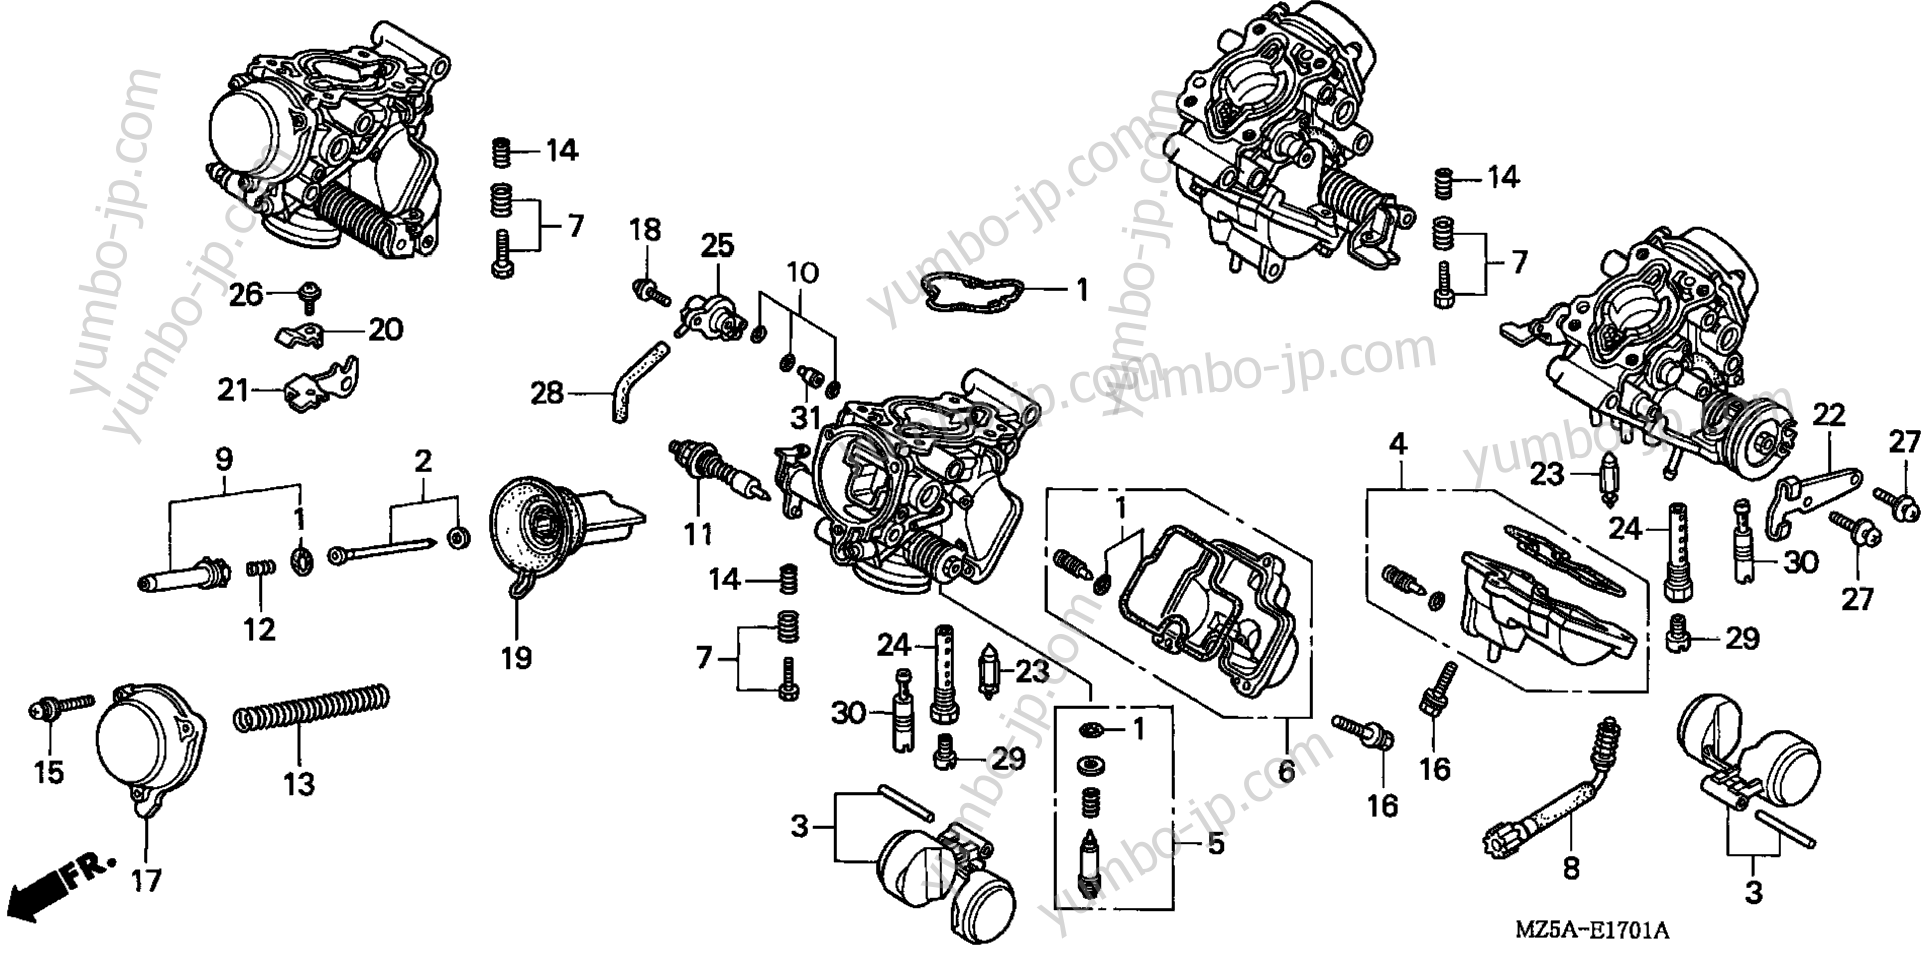 CARBURETOR COMPONENTS for motorcycles HONDA VF750C A 2002 year